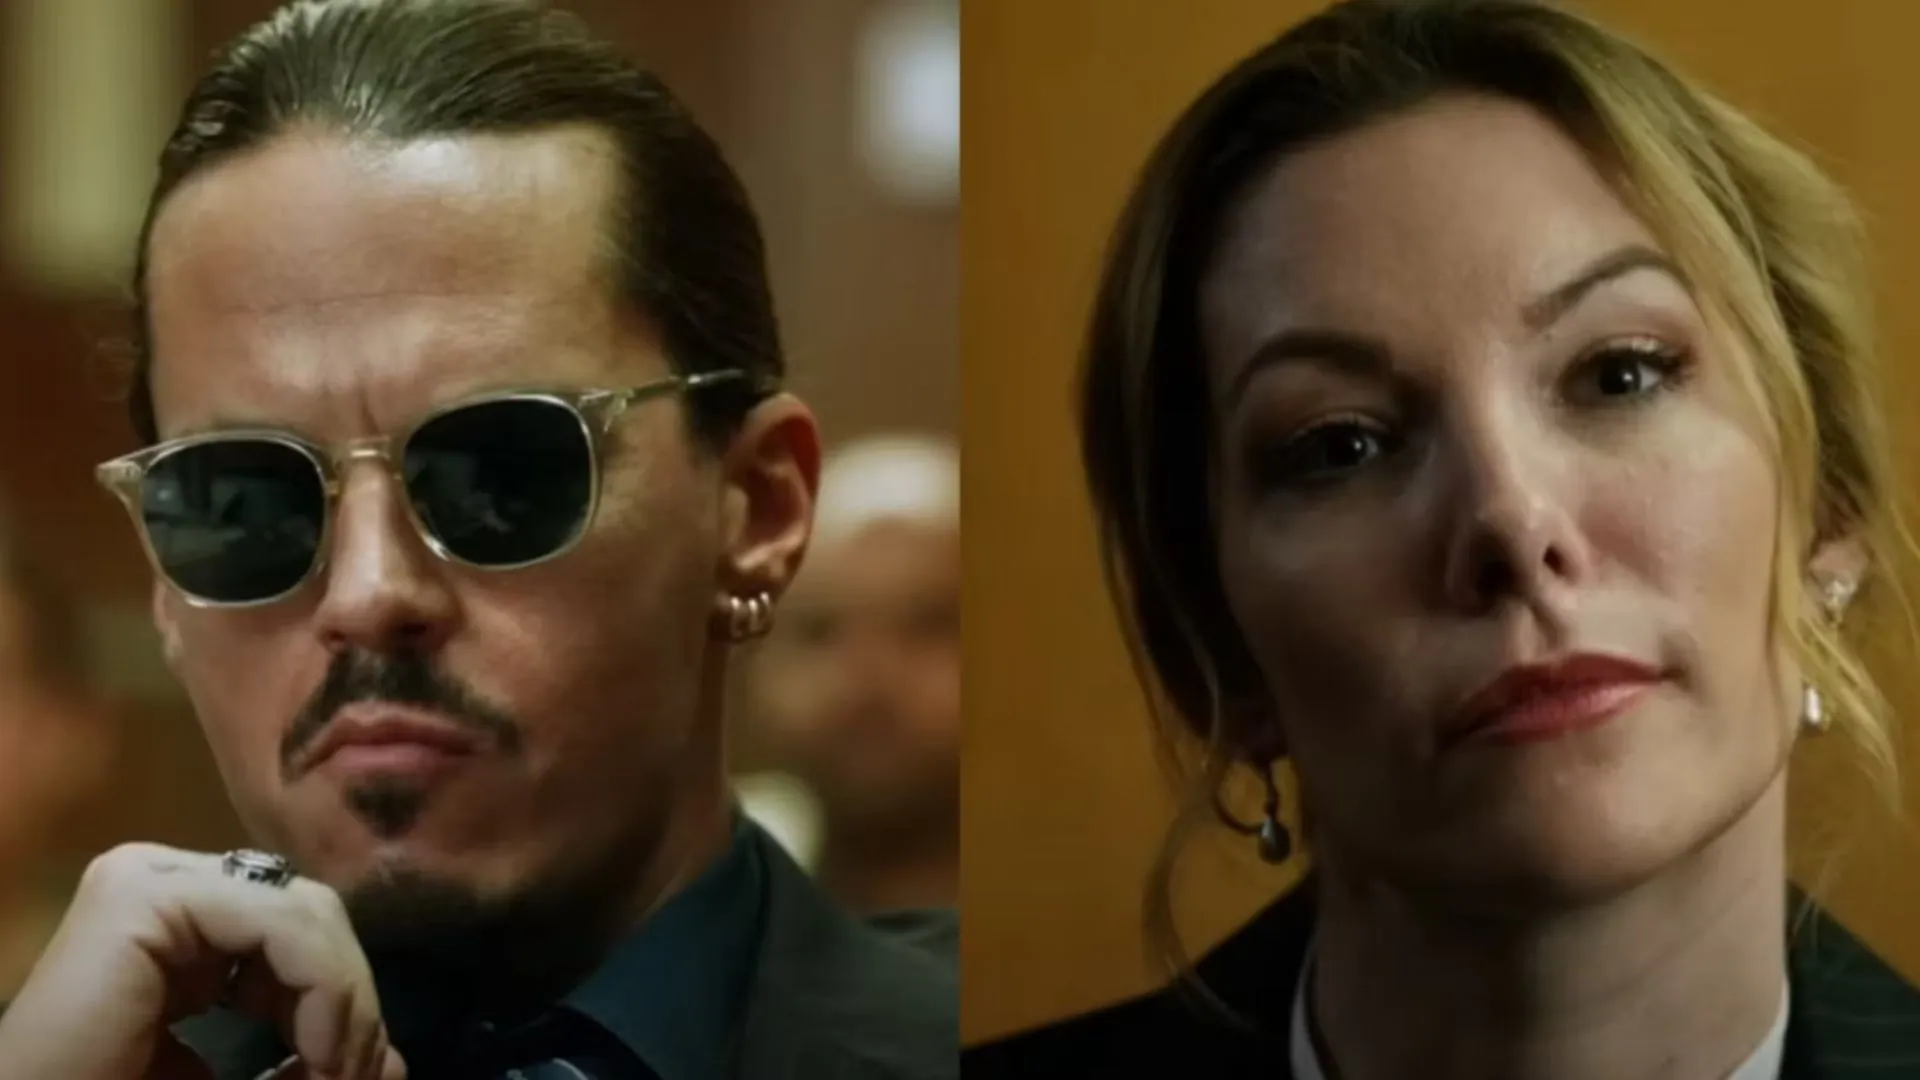 _Johnny Depp and Amber Heard trial movie gets trailer